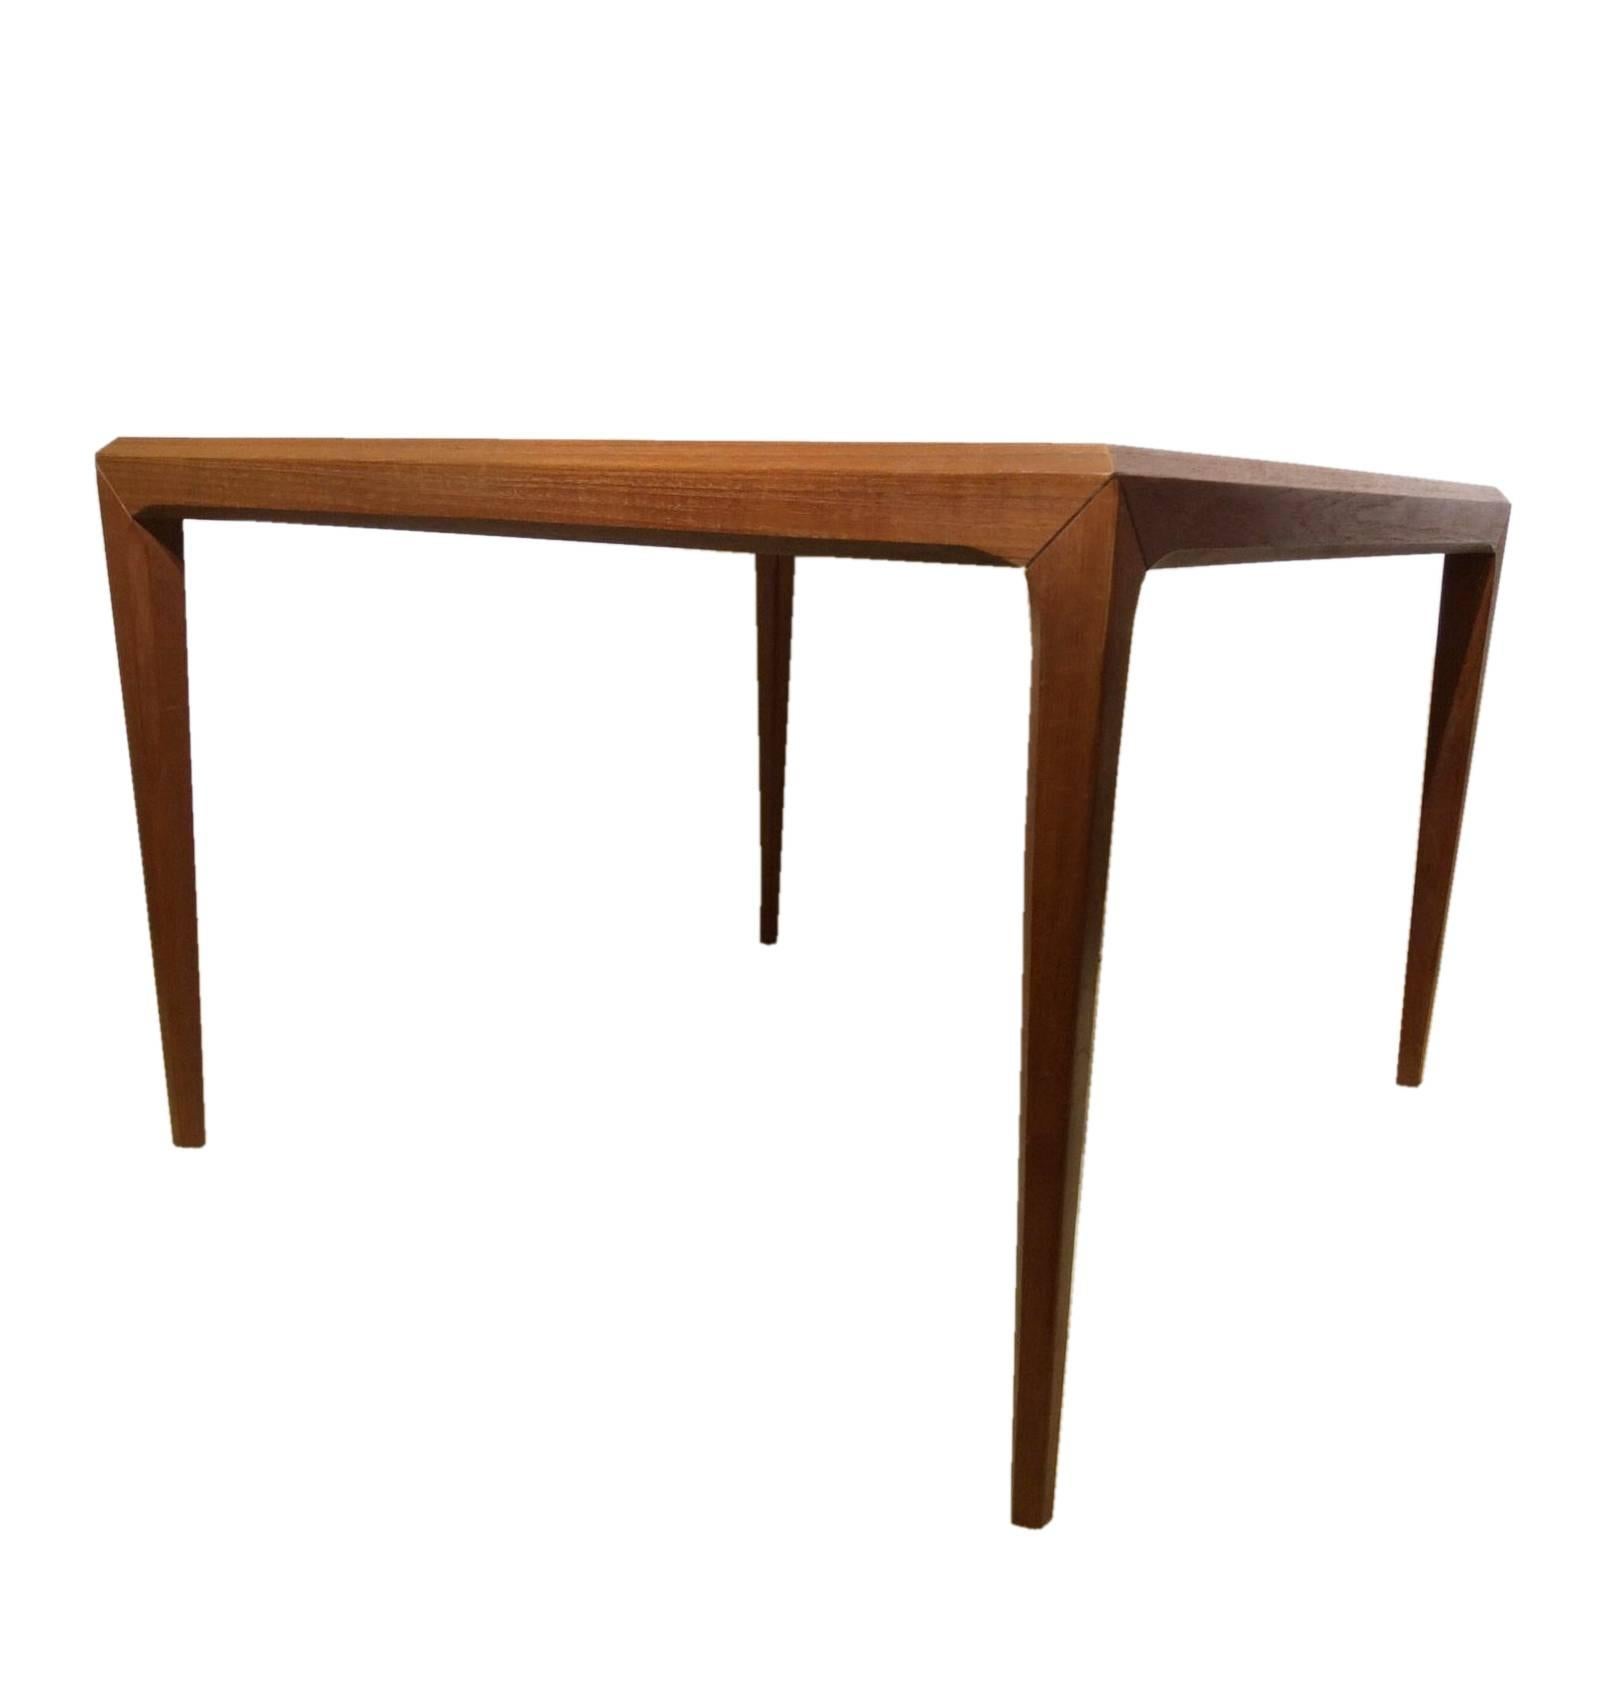 Danish Mid-Century Cubic Teak Coffee Table by Johannes Andersen for Silkeborg In Good Condition For Sale In Basel, CH